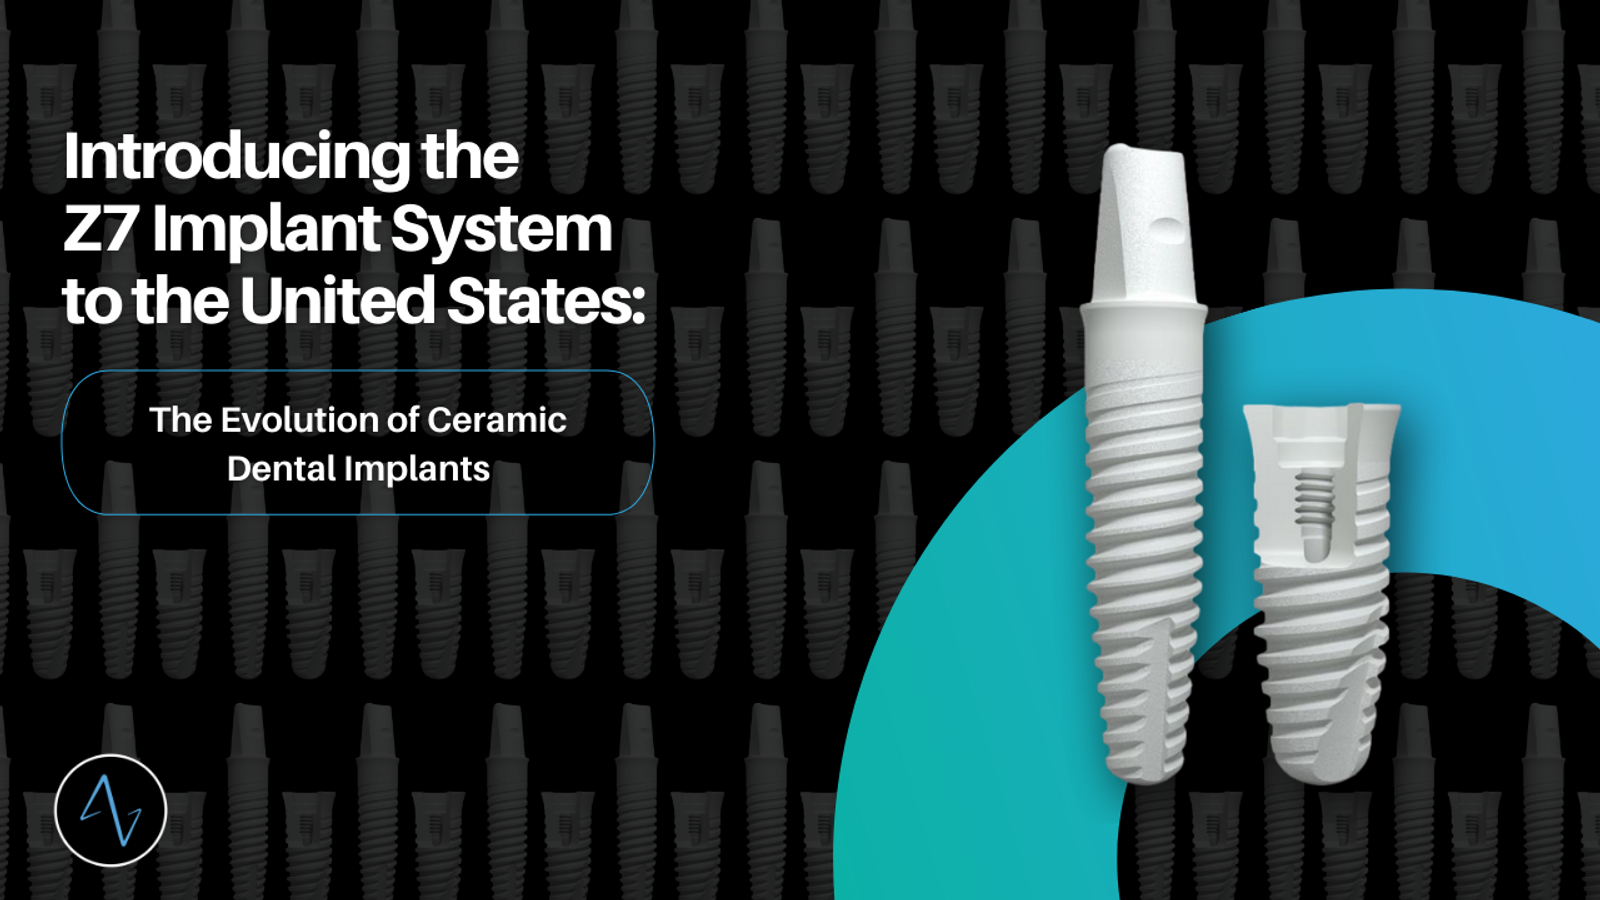 Introducing the Z7 Implant System to the United States: The Evolution of Ceramic Dental Implants